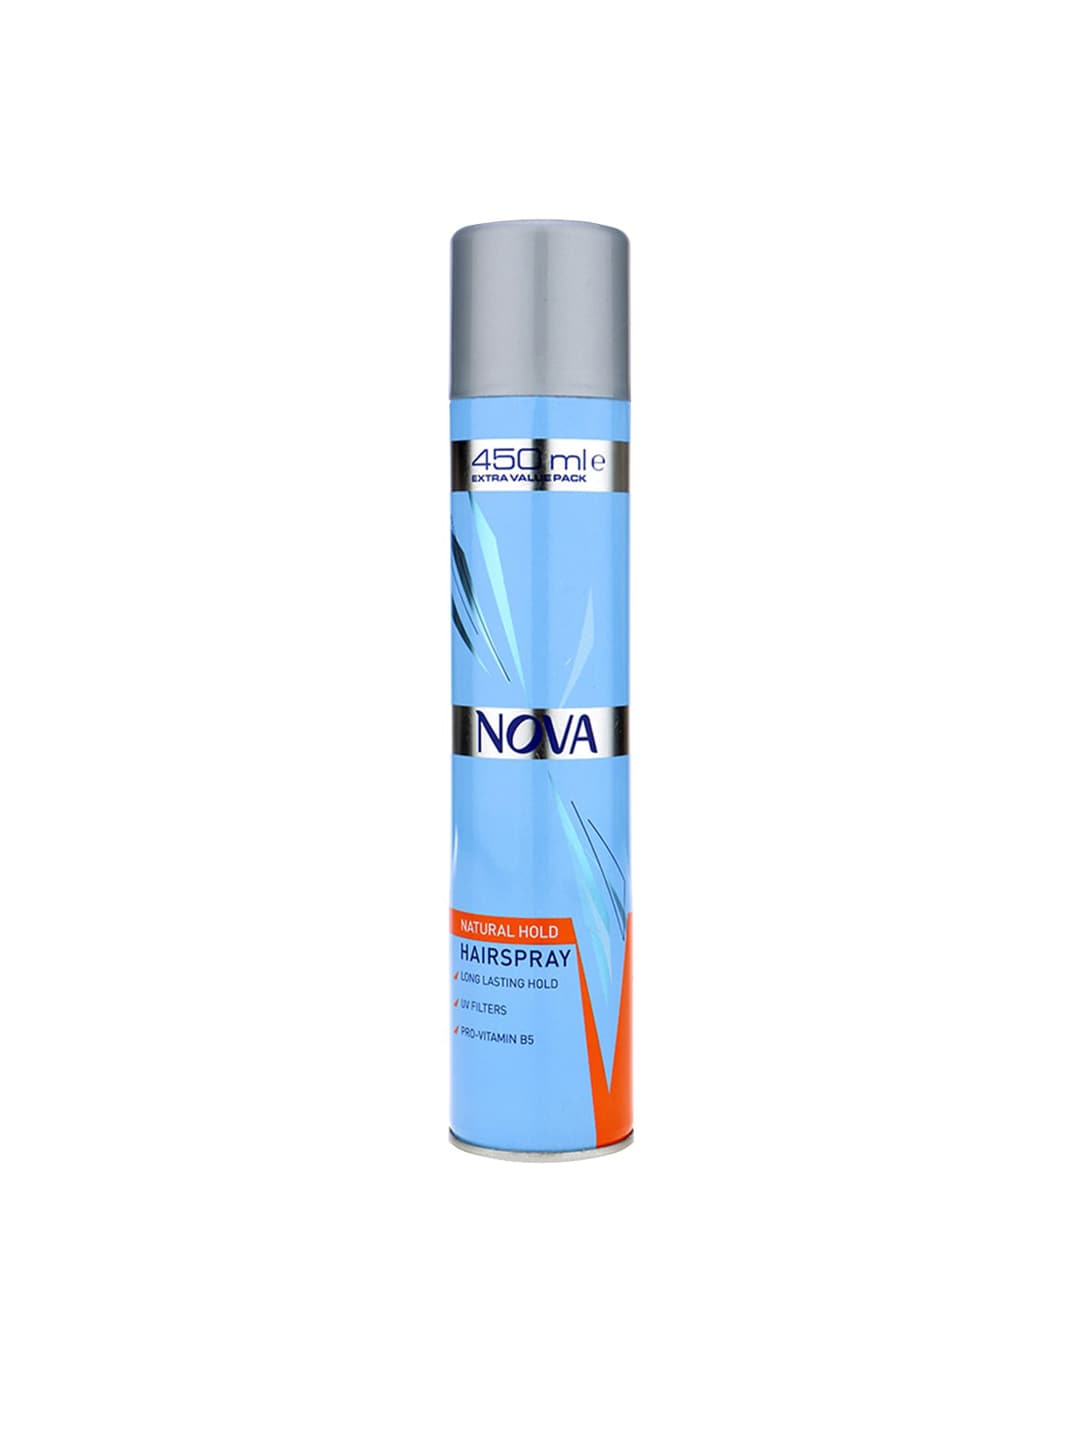 NOVA Unisex Natural Hold Hair Spray Blue 450ml Price in India, Full  Specifications & Offers 